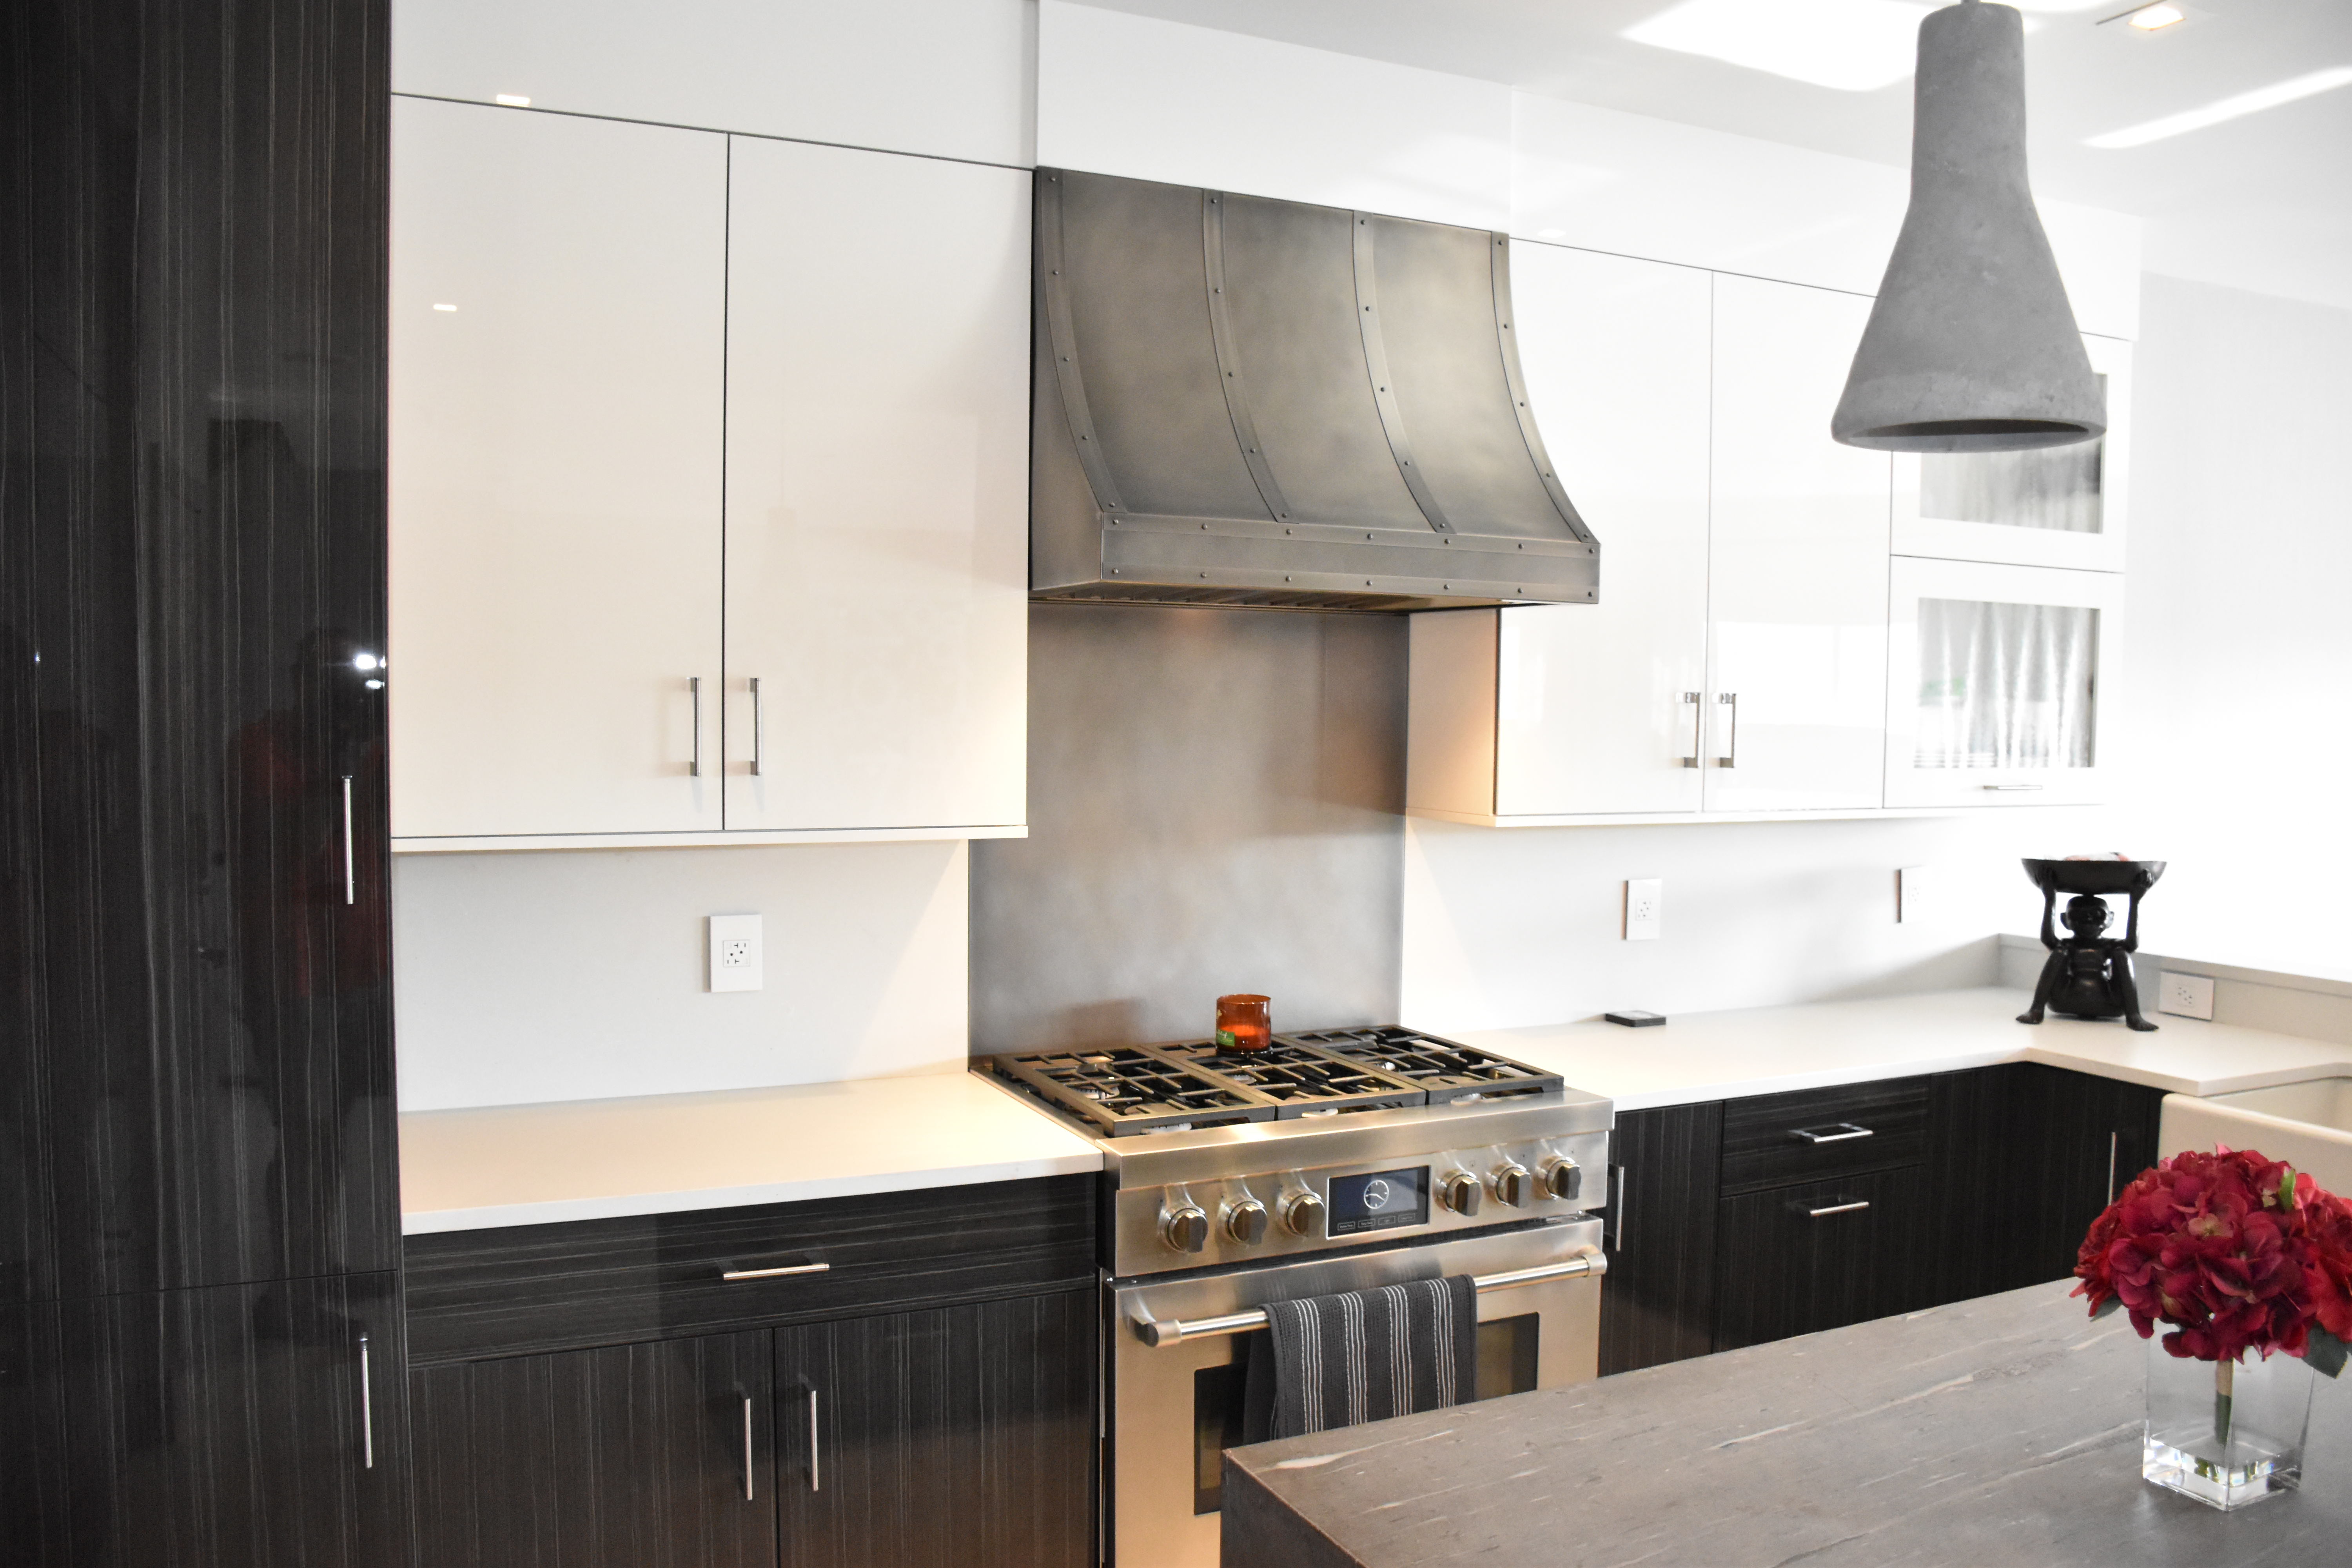 Range Hood Mounting Height (Complete Guide)